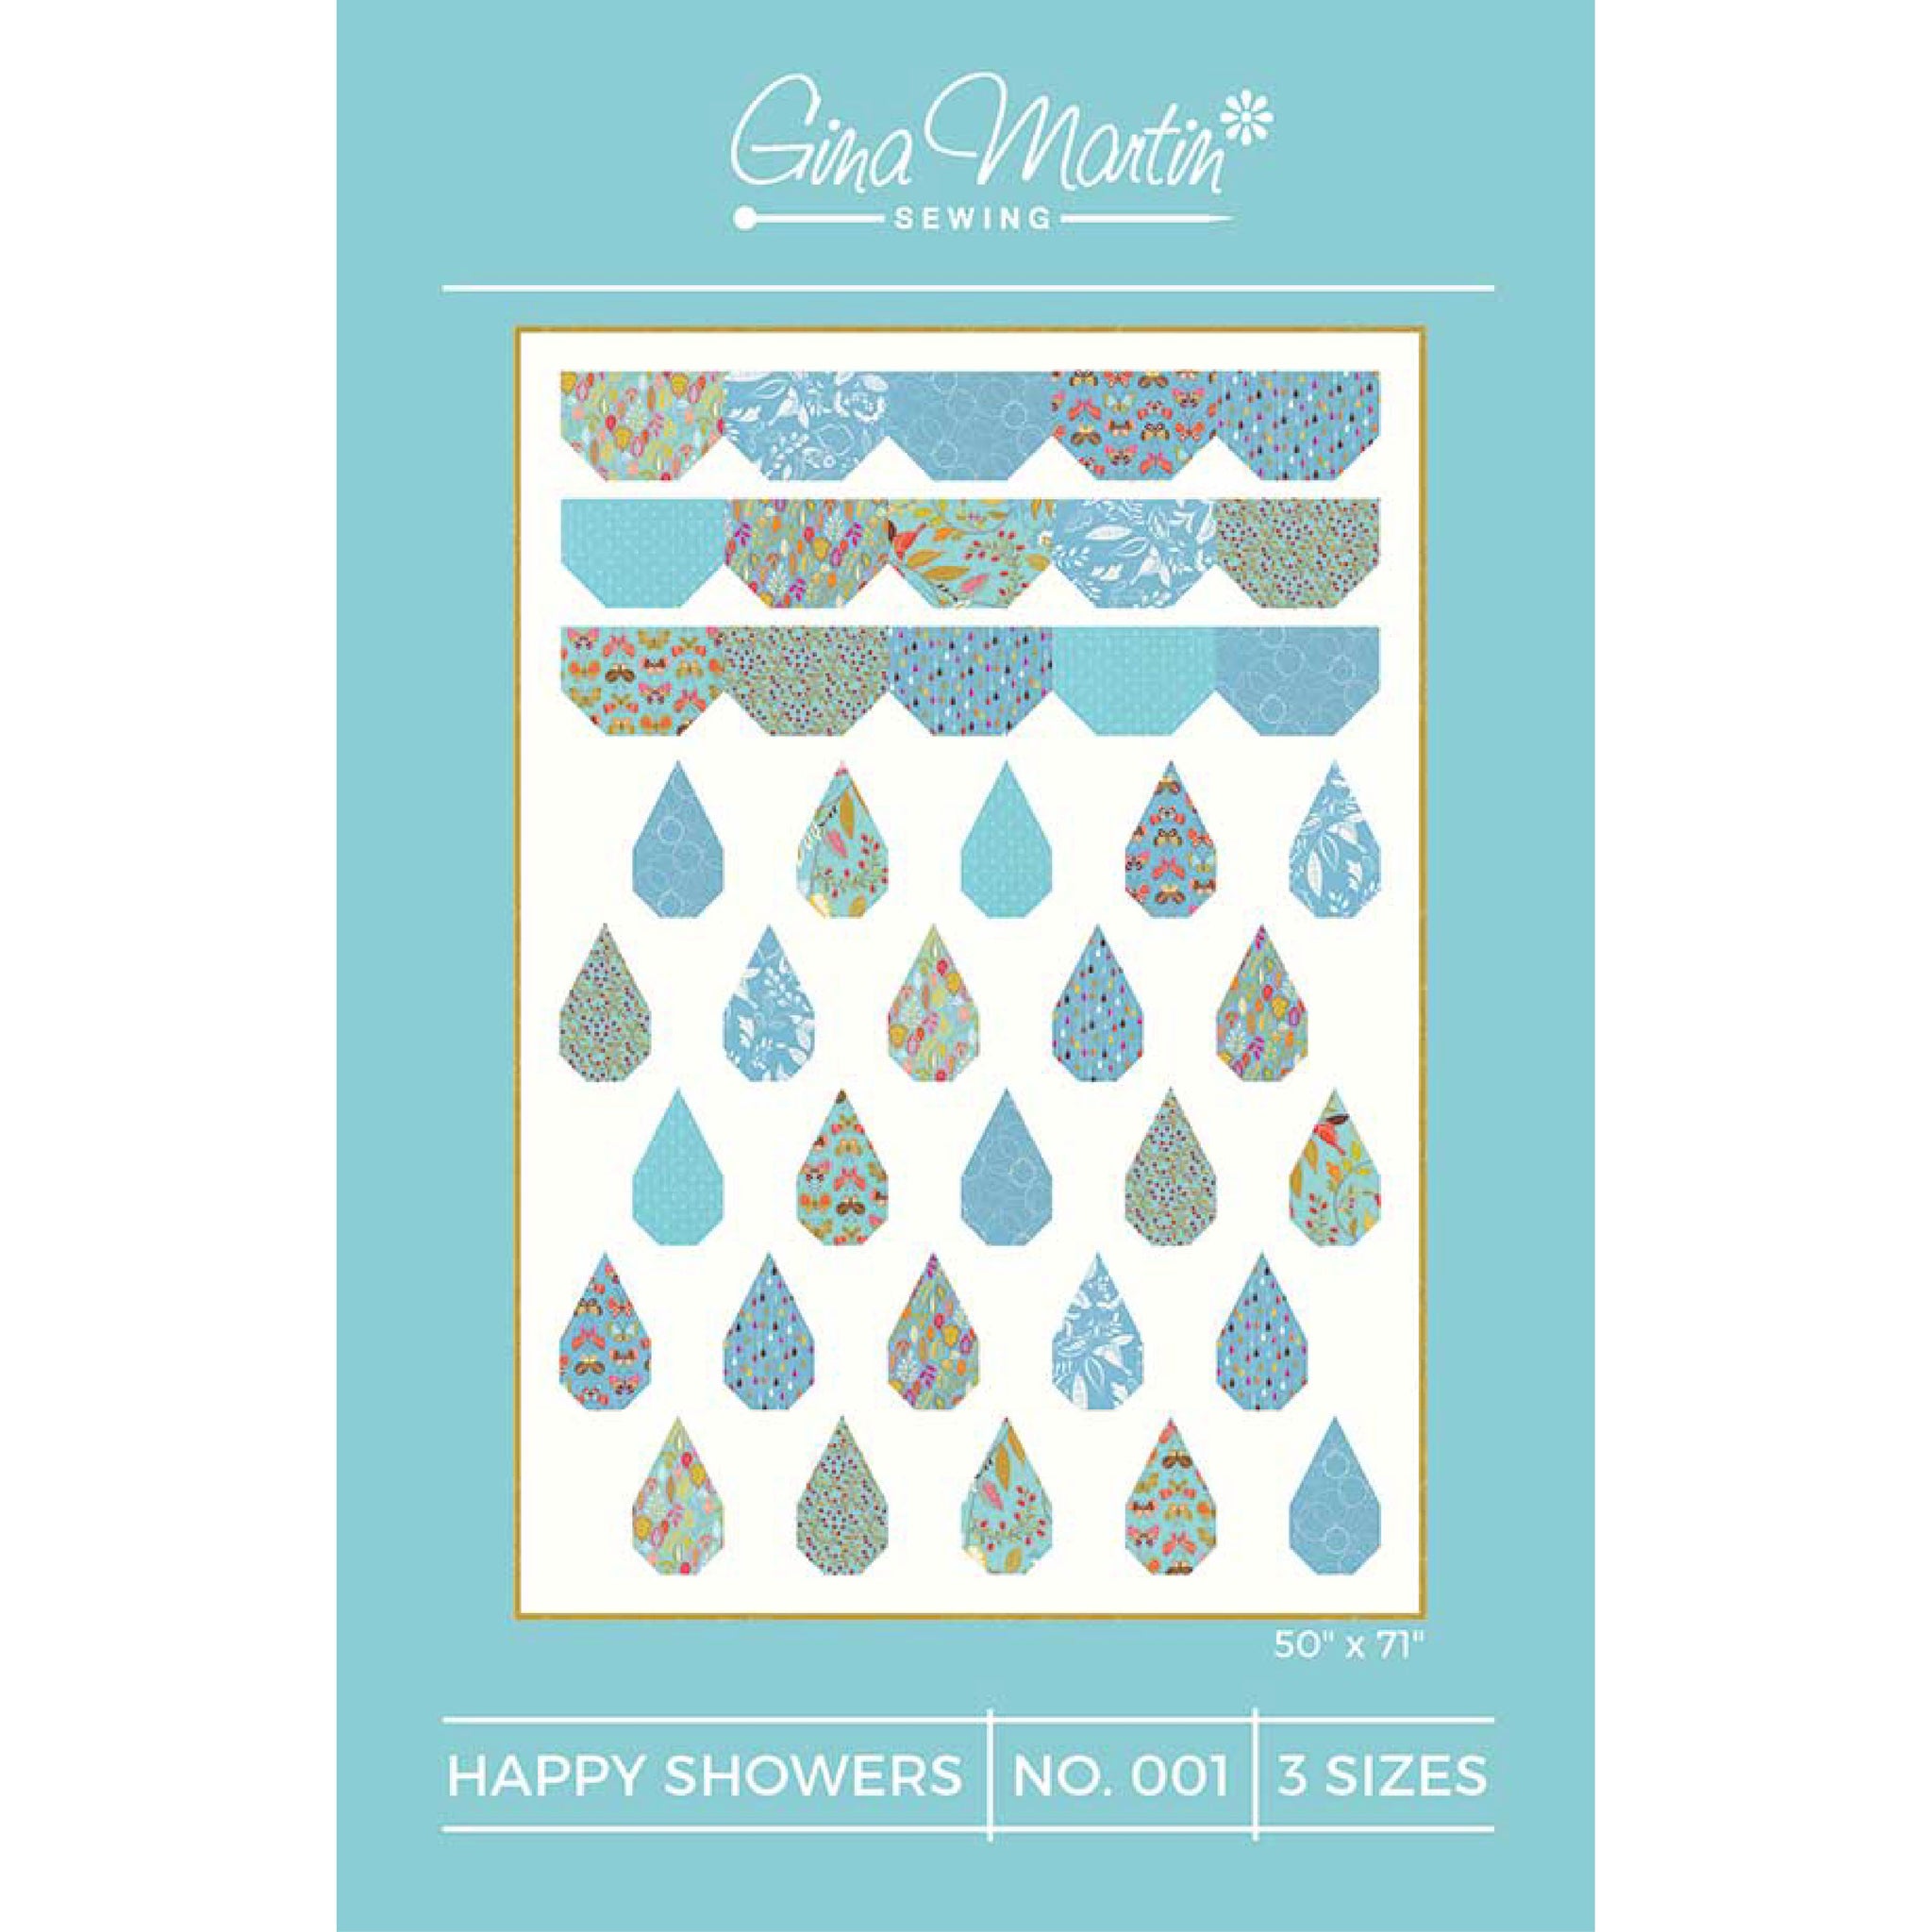 Happy Showers by Gina Martin Sewing